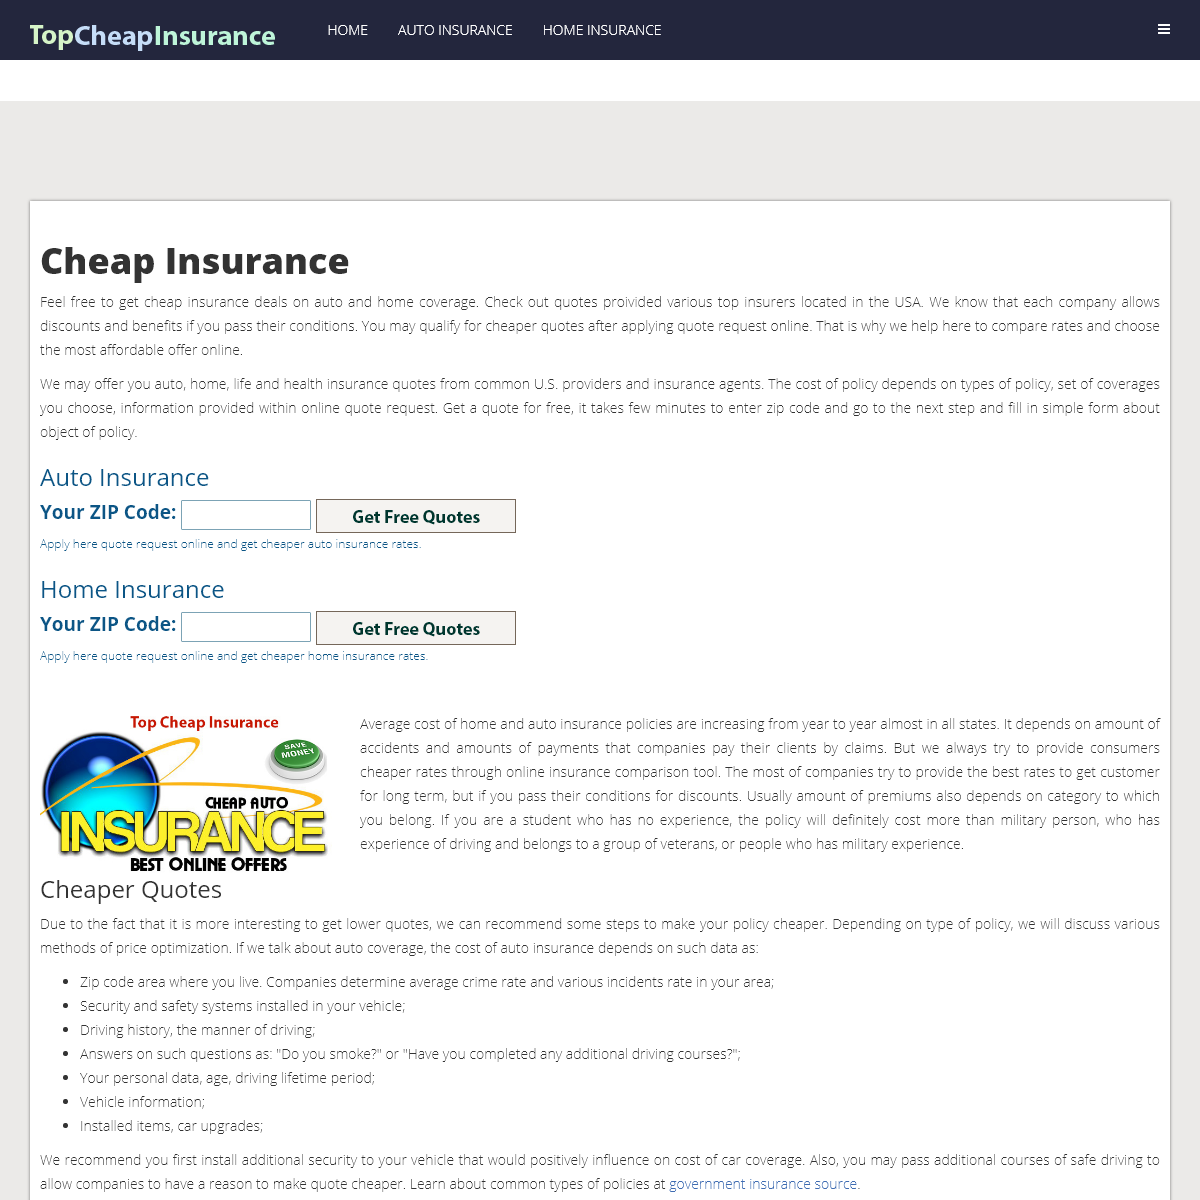 A complete backup of topcheapinsurance.com